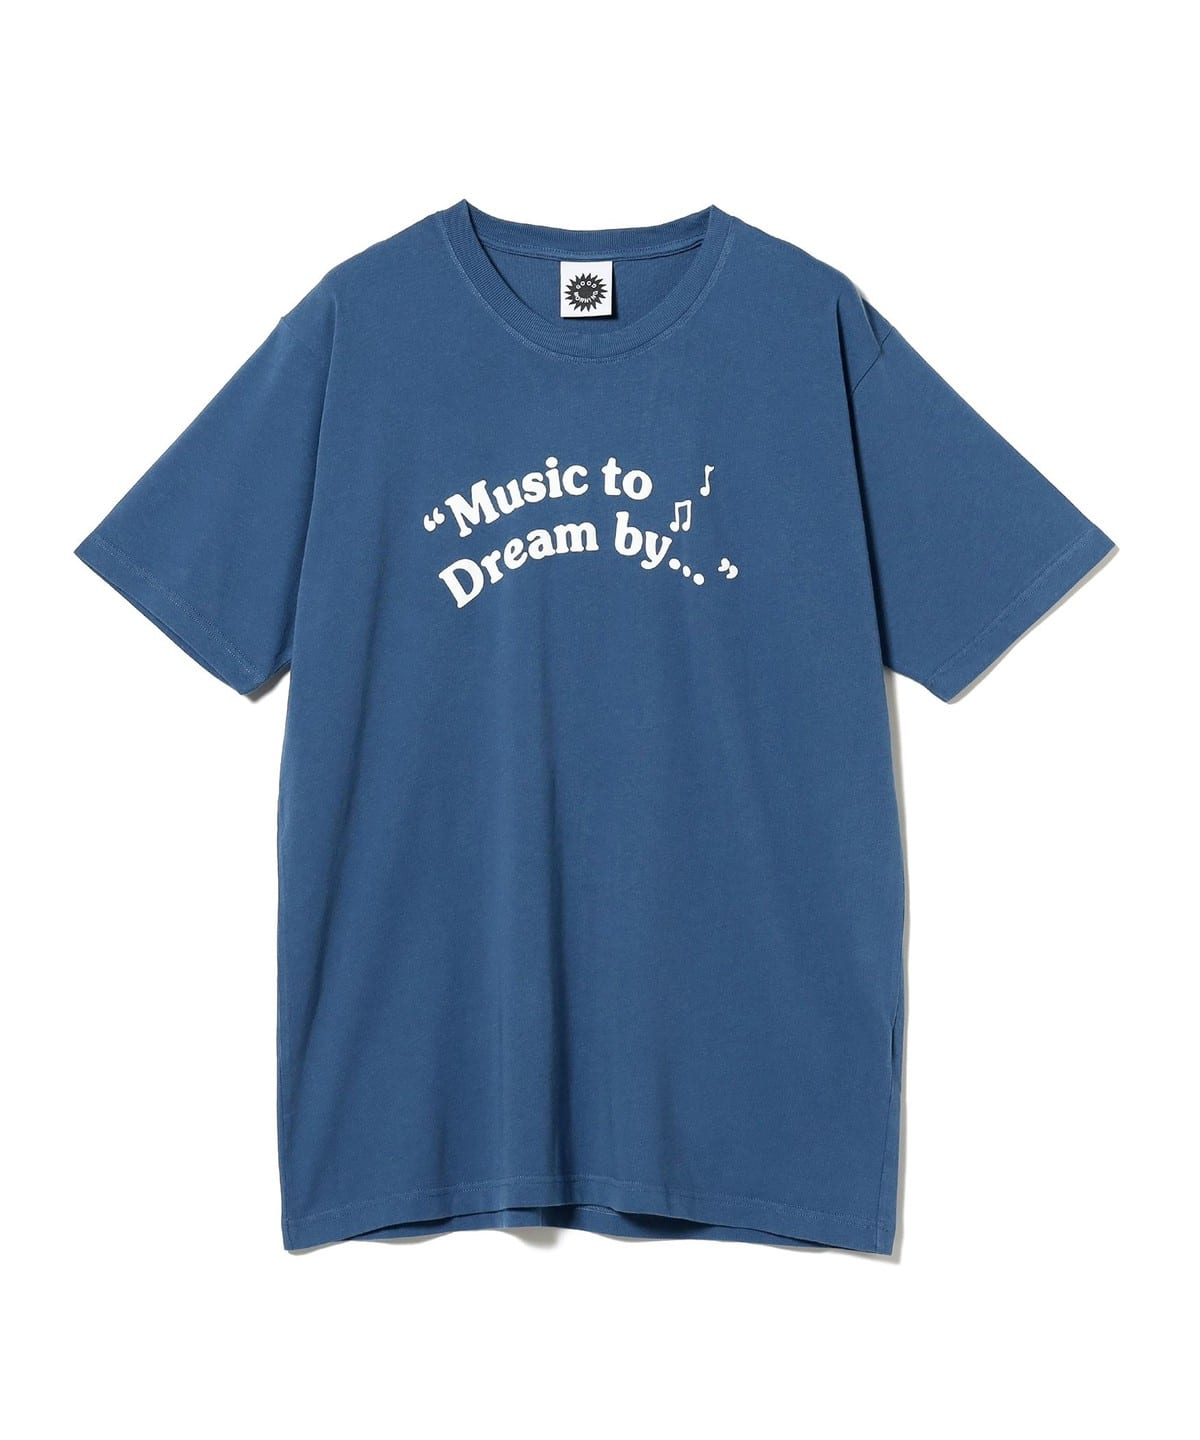 BEAMS T（ビームスT）Good Morning Tapes / MUSIC TO DREAM BY TEE（Tシャツ・カットソー プリントTシャツ ）通販｜BEAMS